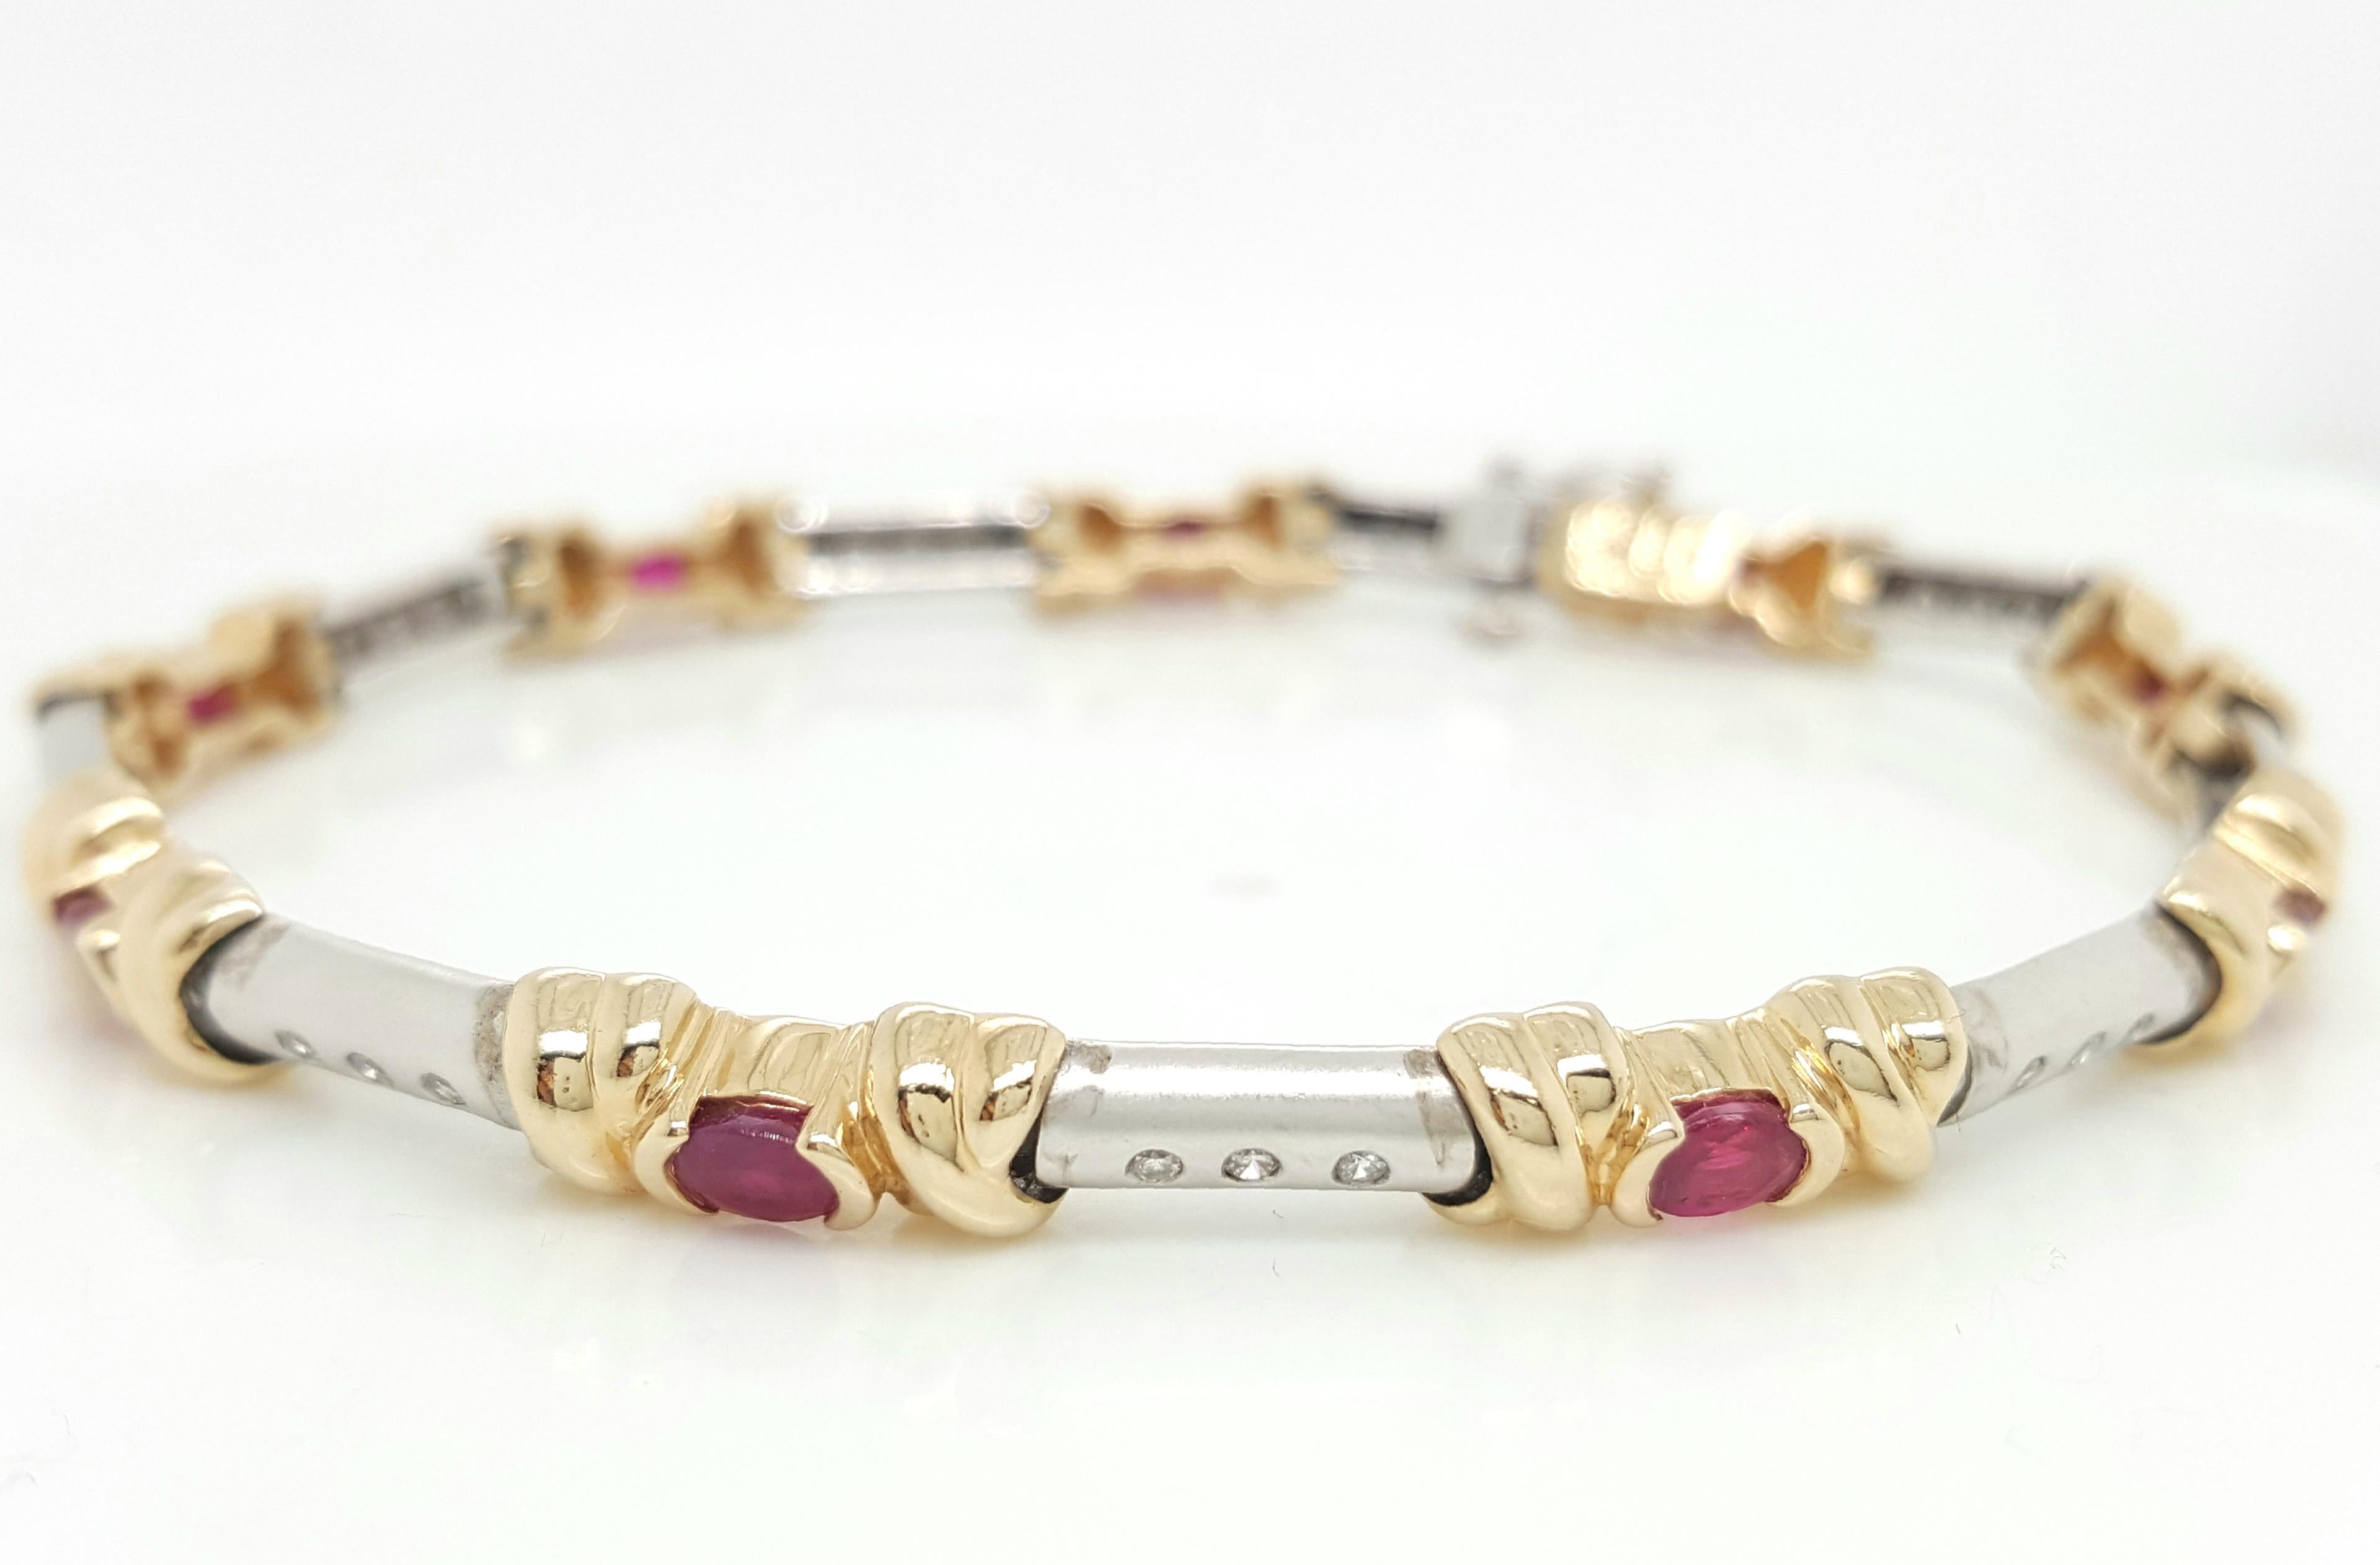 Estate 14 Karat Yellow and White Gold Oval Ruby Diamond Bracelet   The beautiful articulated bracelet features nine 14 karat yellow gold stations each with two X motifs holding a half bezel set oval ruby weighing approximately  1.08 carats total